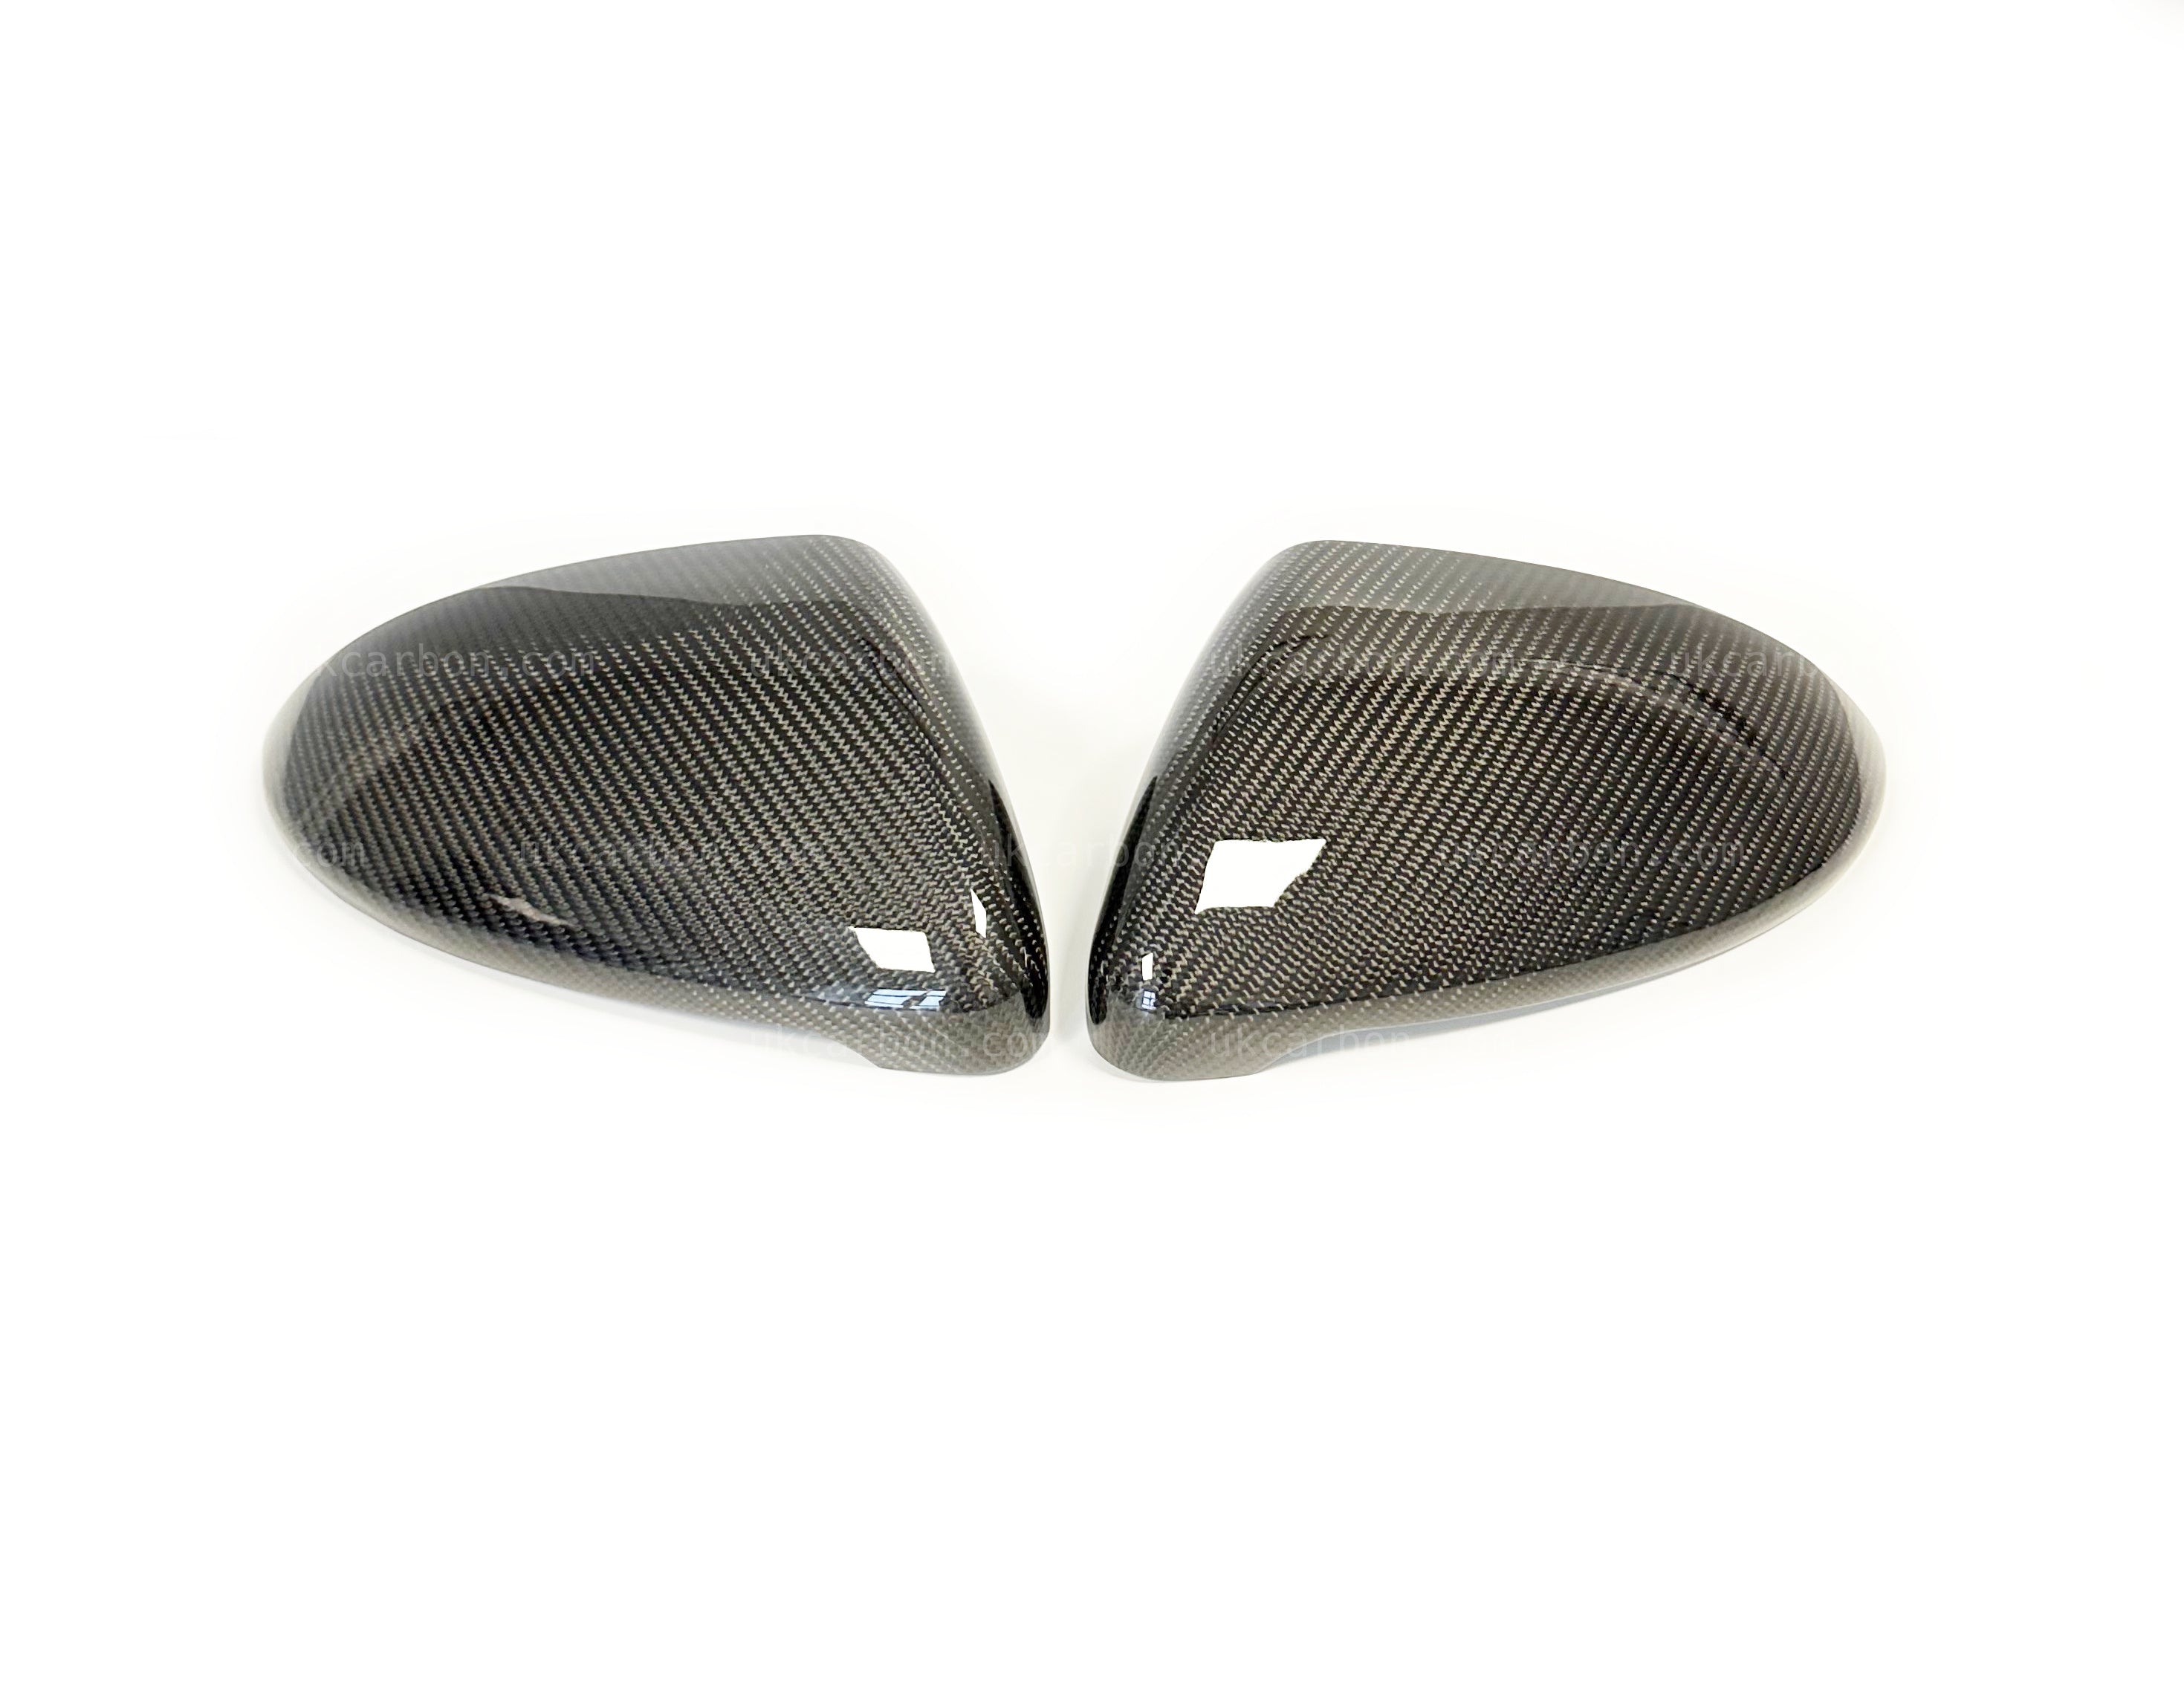 Volkswagen Golf GTI R Carbon Fibre Wing Mirror Cover VW MK7.5 by UKCarbon